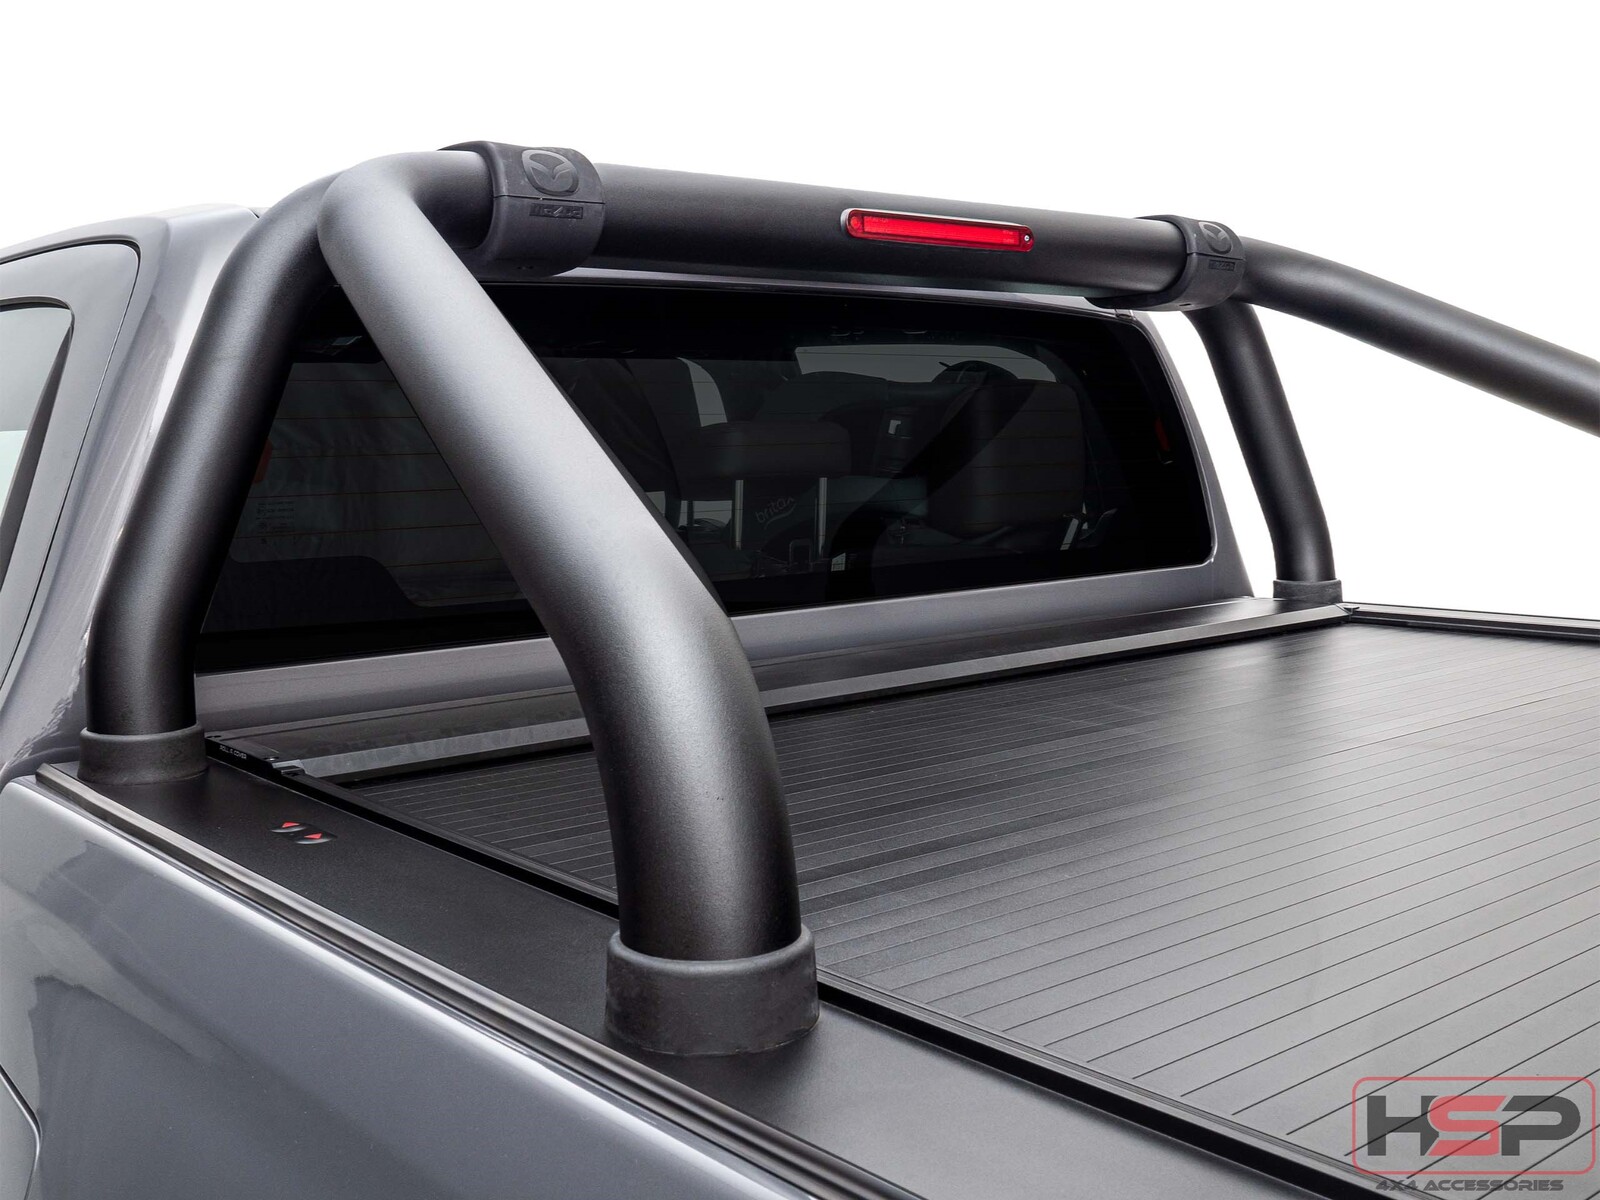 HSP Roll R Cover Series 3 To Suit Mazda BT-50 2020 + Dual Cab With Genuine A Frame Sports Bar